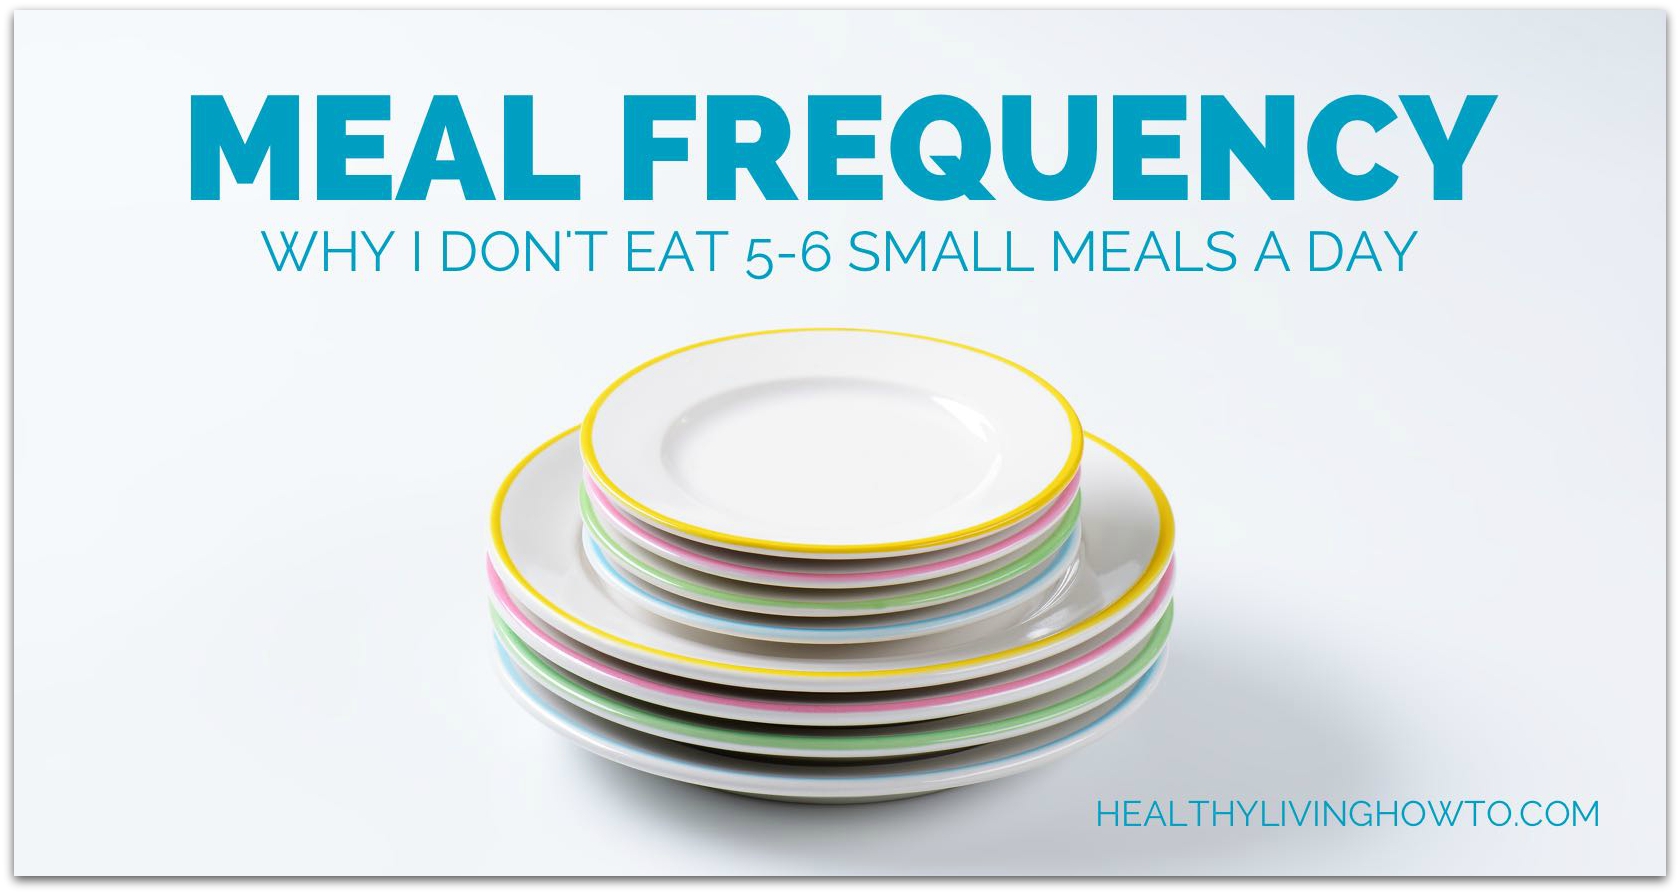 Meal Frequency | healthylivinghowto.com